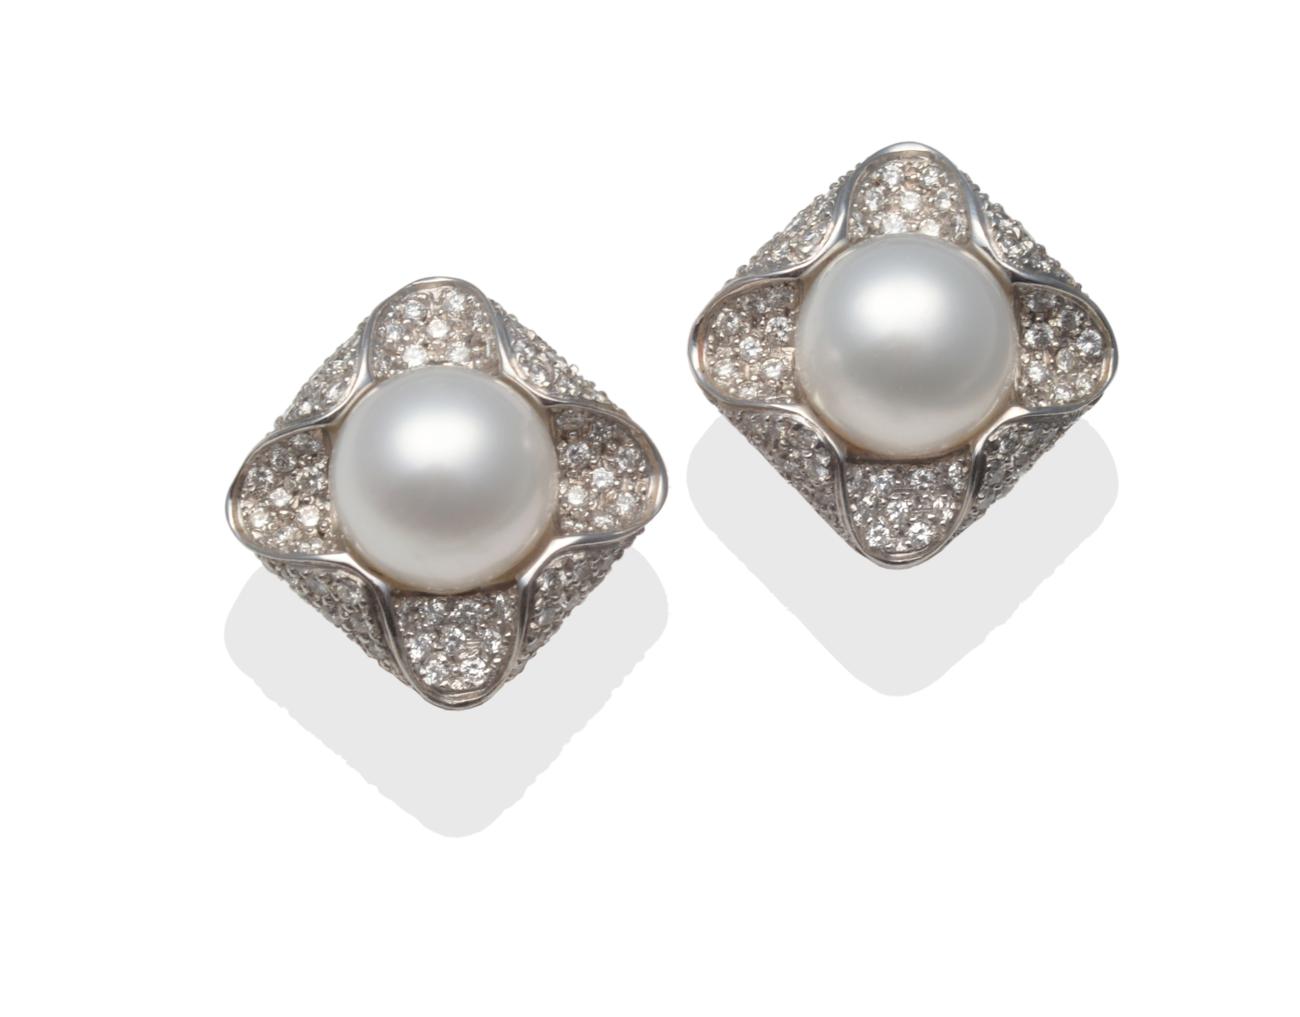 Lot 234 - A Pair of South Sea Cultured Pearl and Diamond Earrings, the cultured pearls set within a...